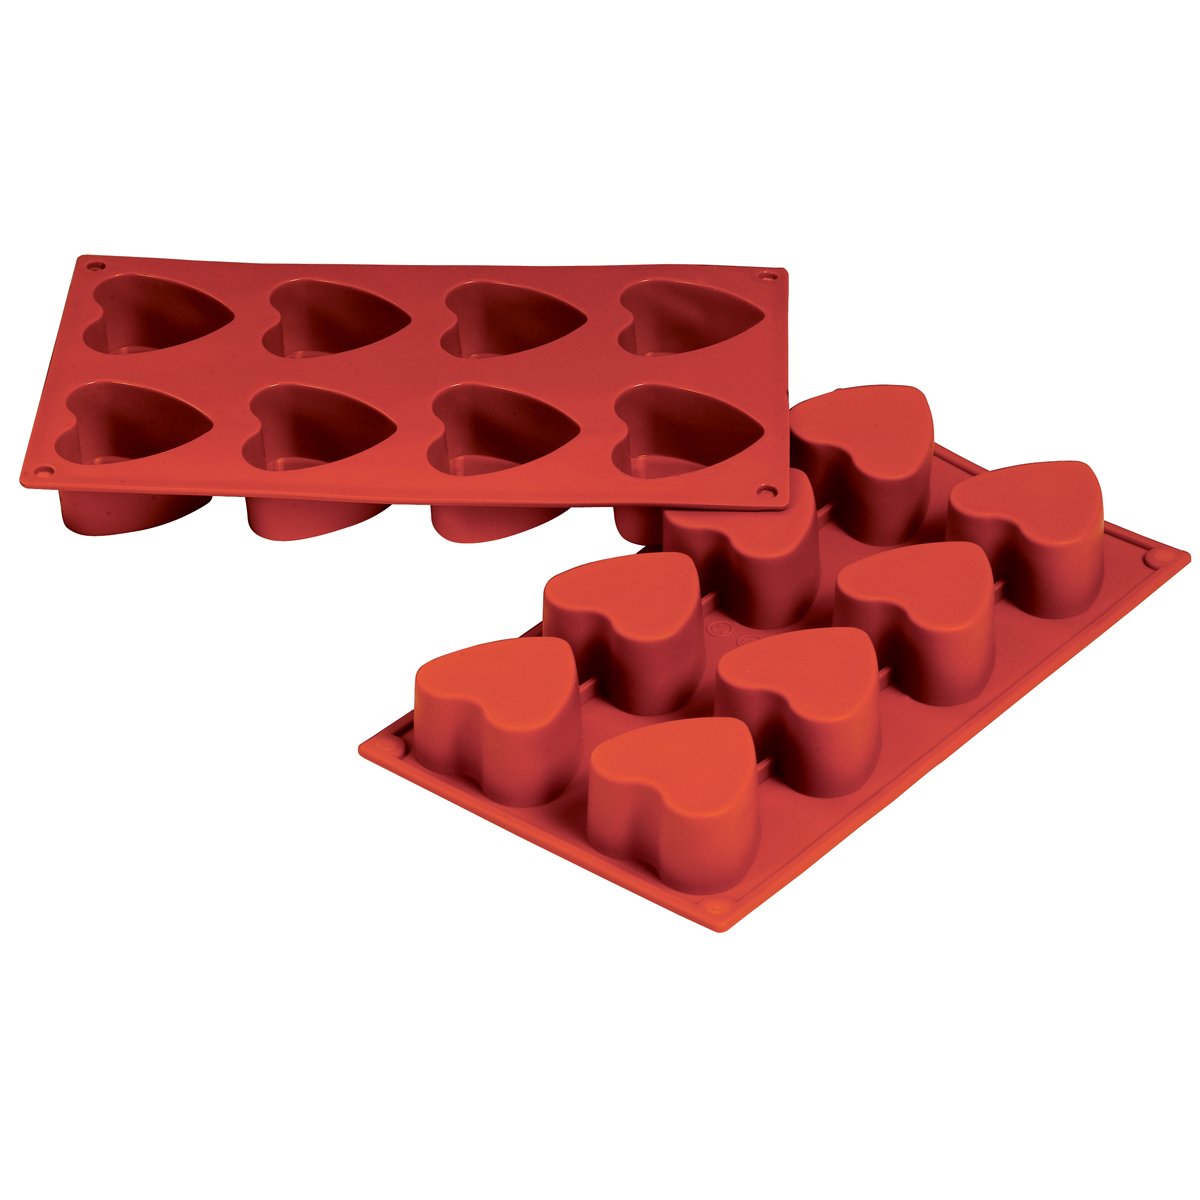 Holiday Silicone Bakeware - Fat Daddio's